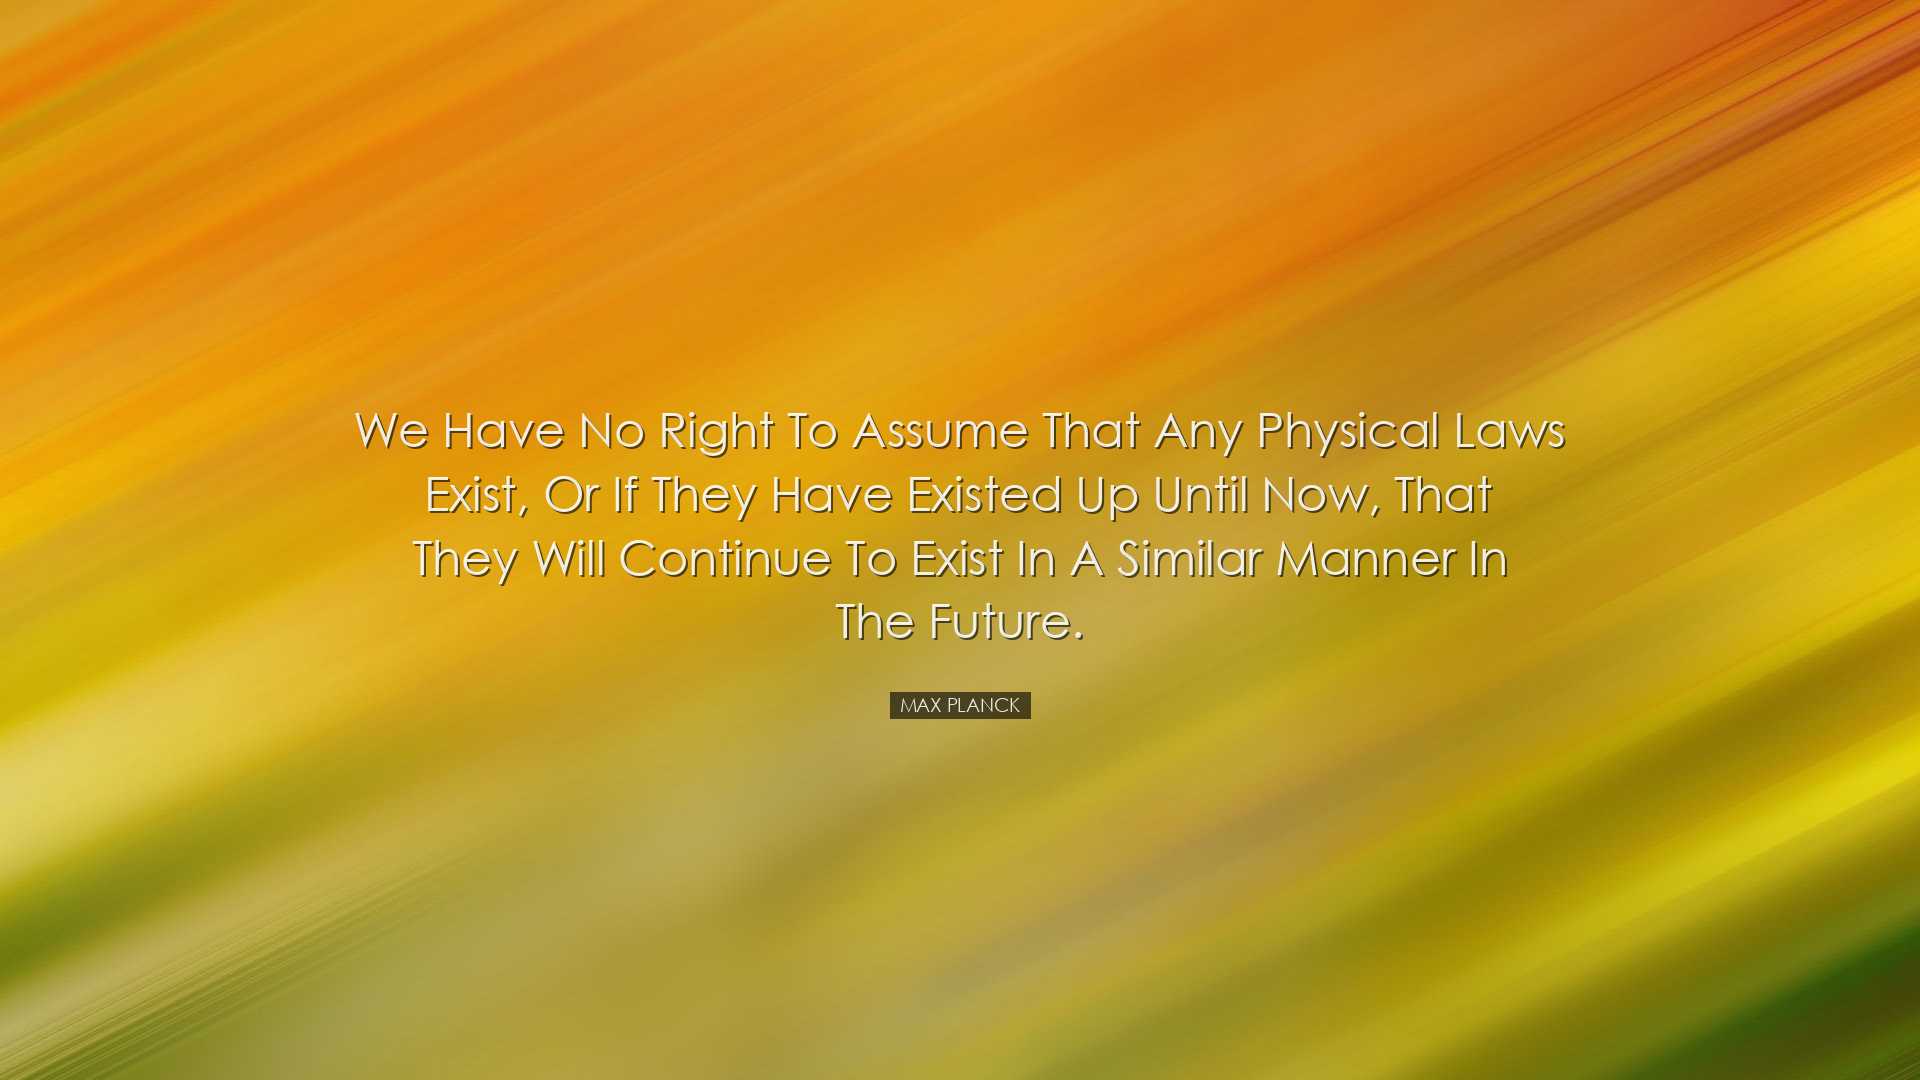 We have no right to assume that any physical laws exist, or if the